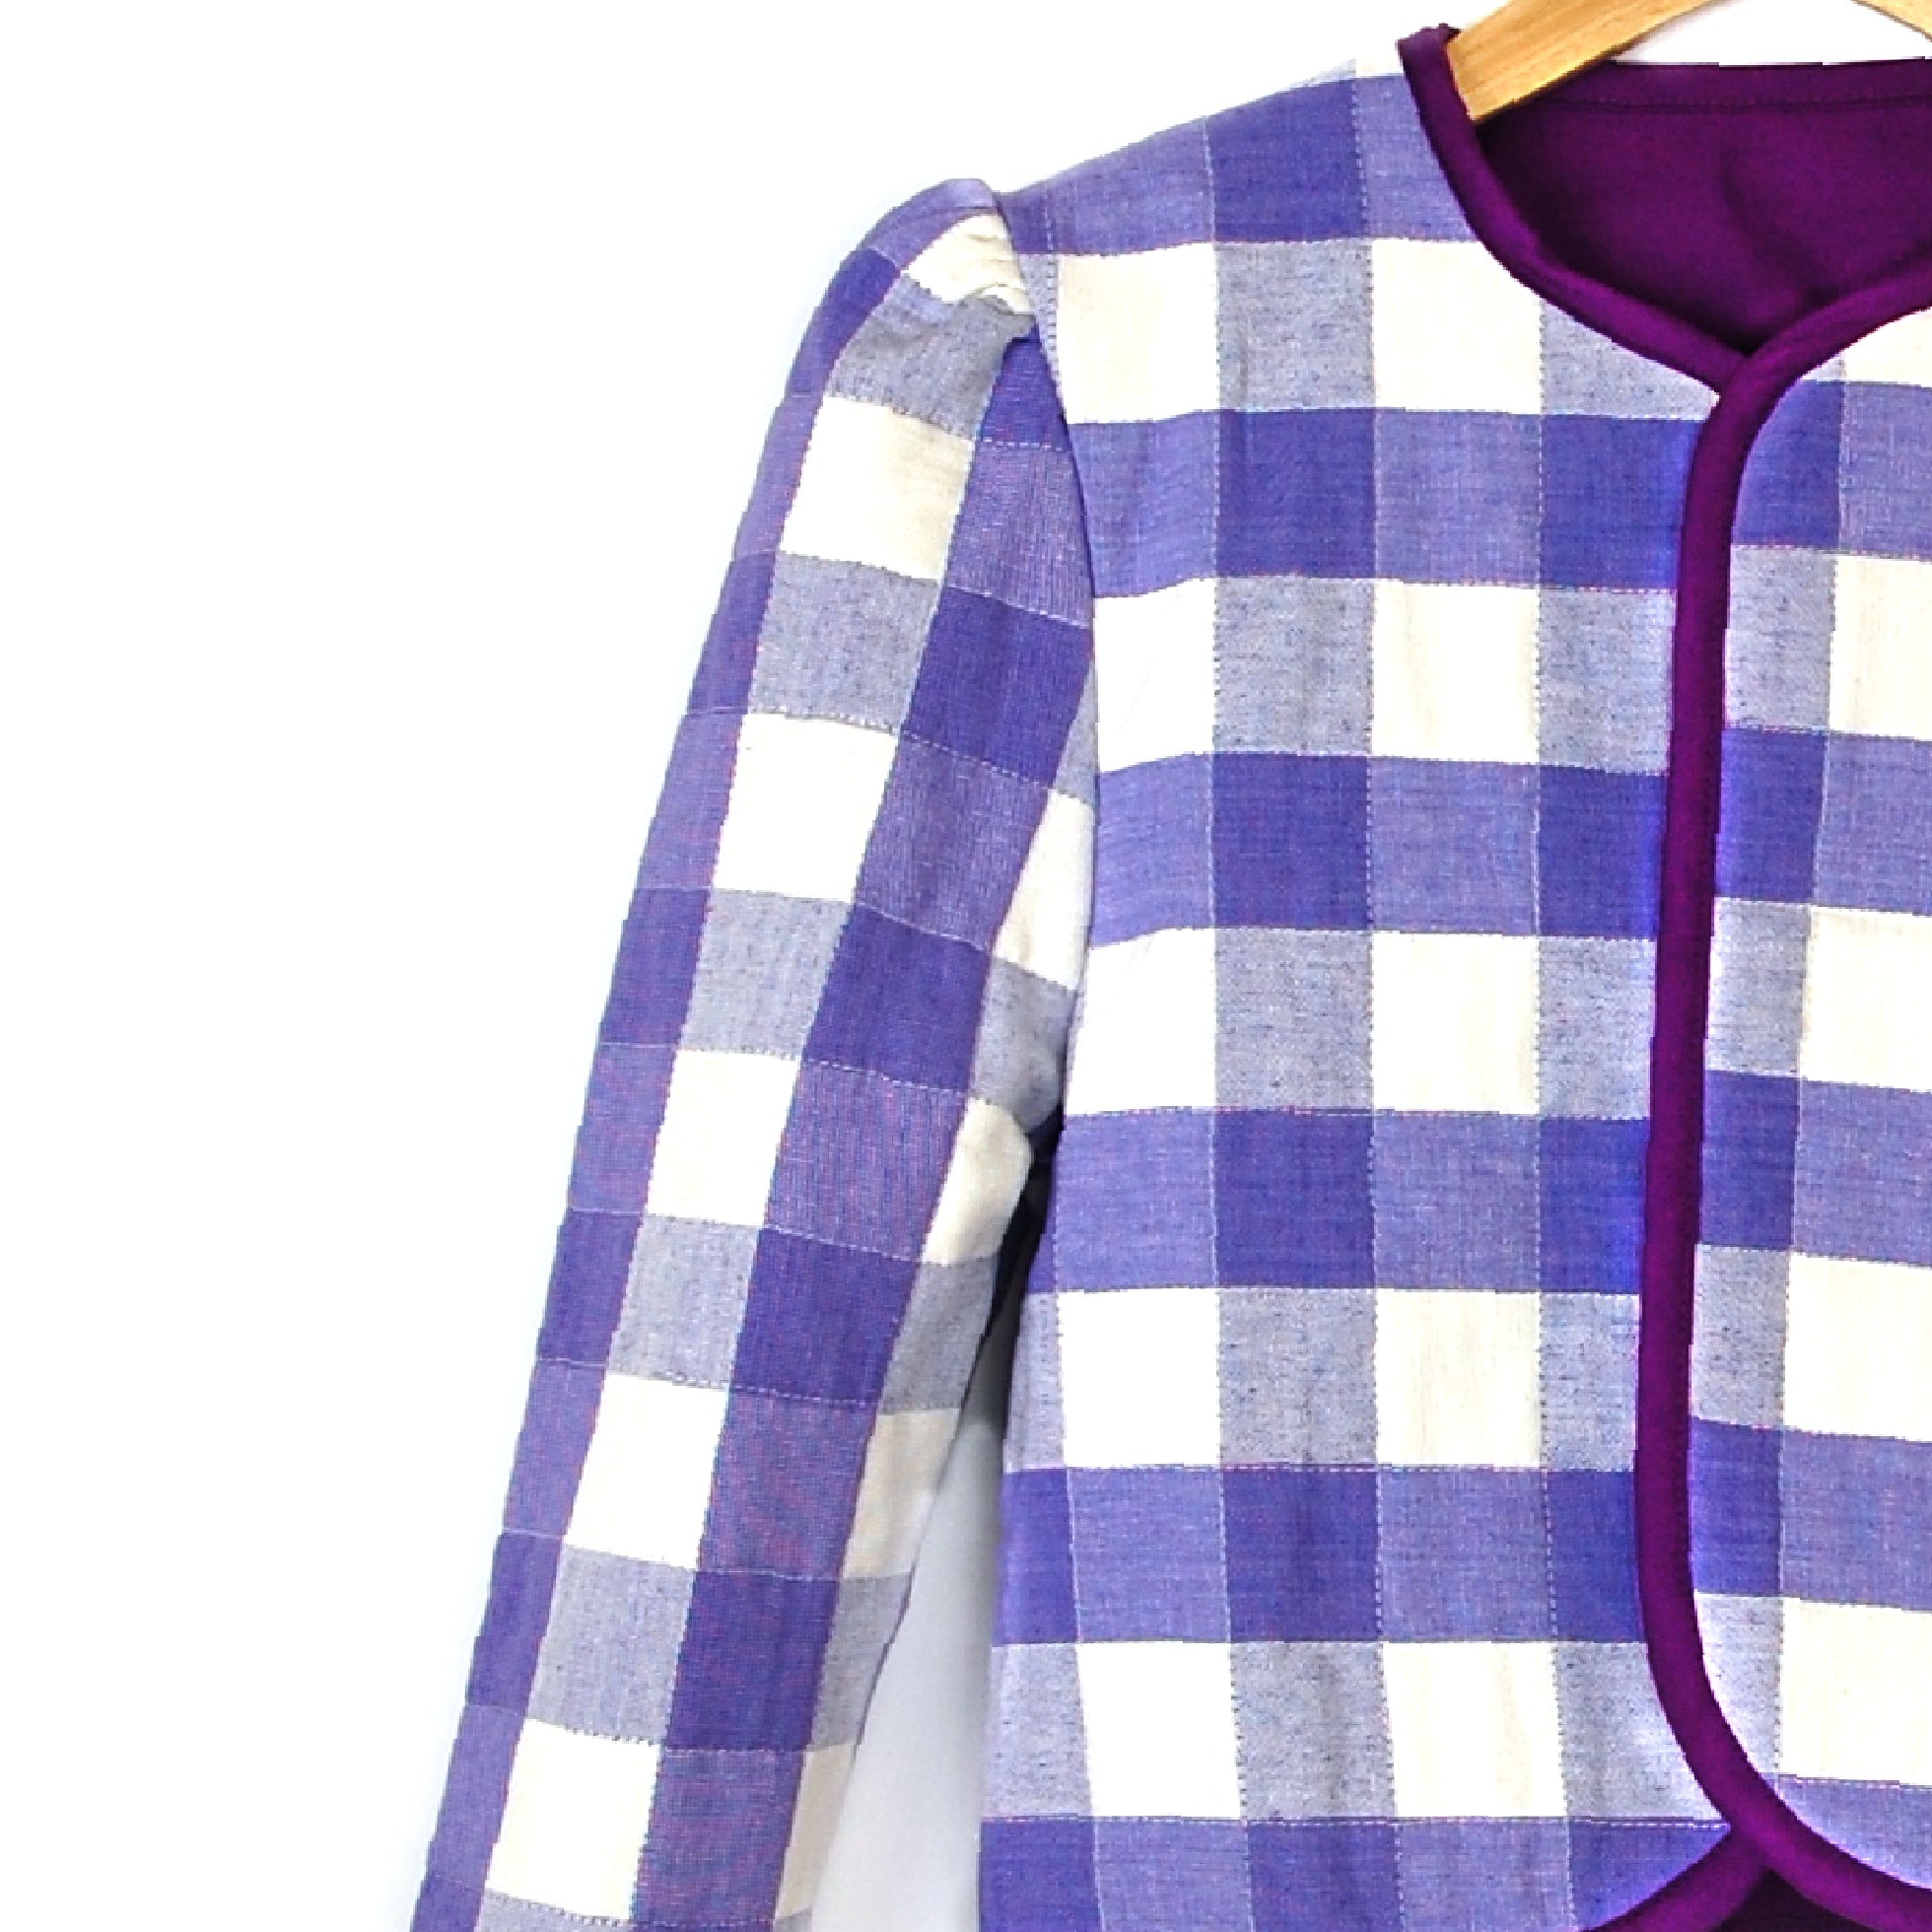 "LAVENDER LUNCH" QUILTED JACKET - Late to the Party